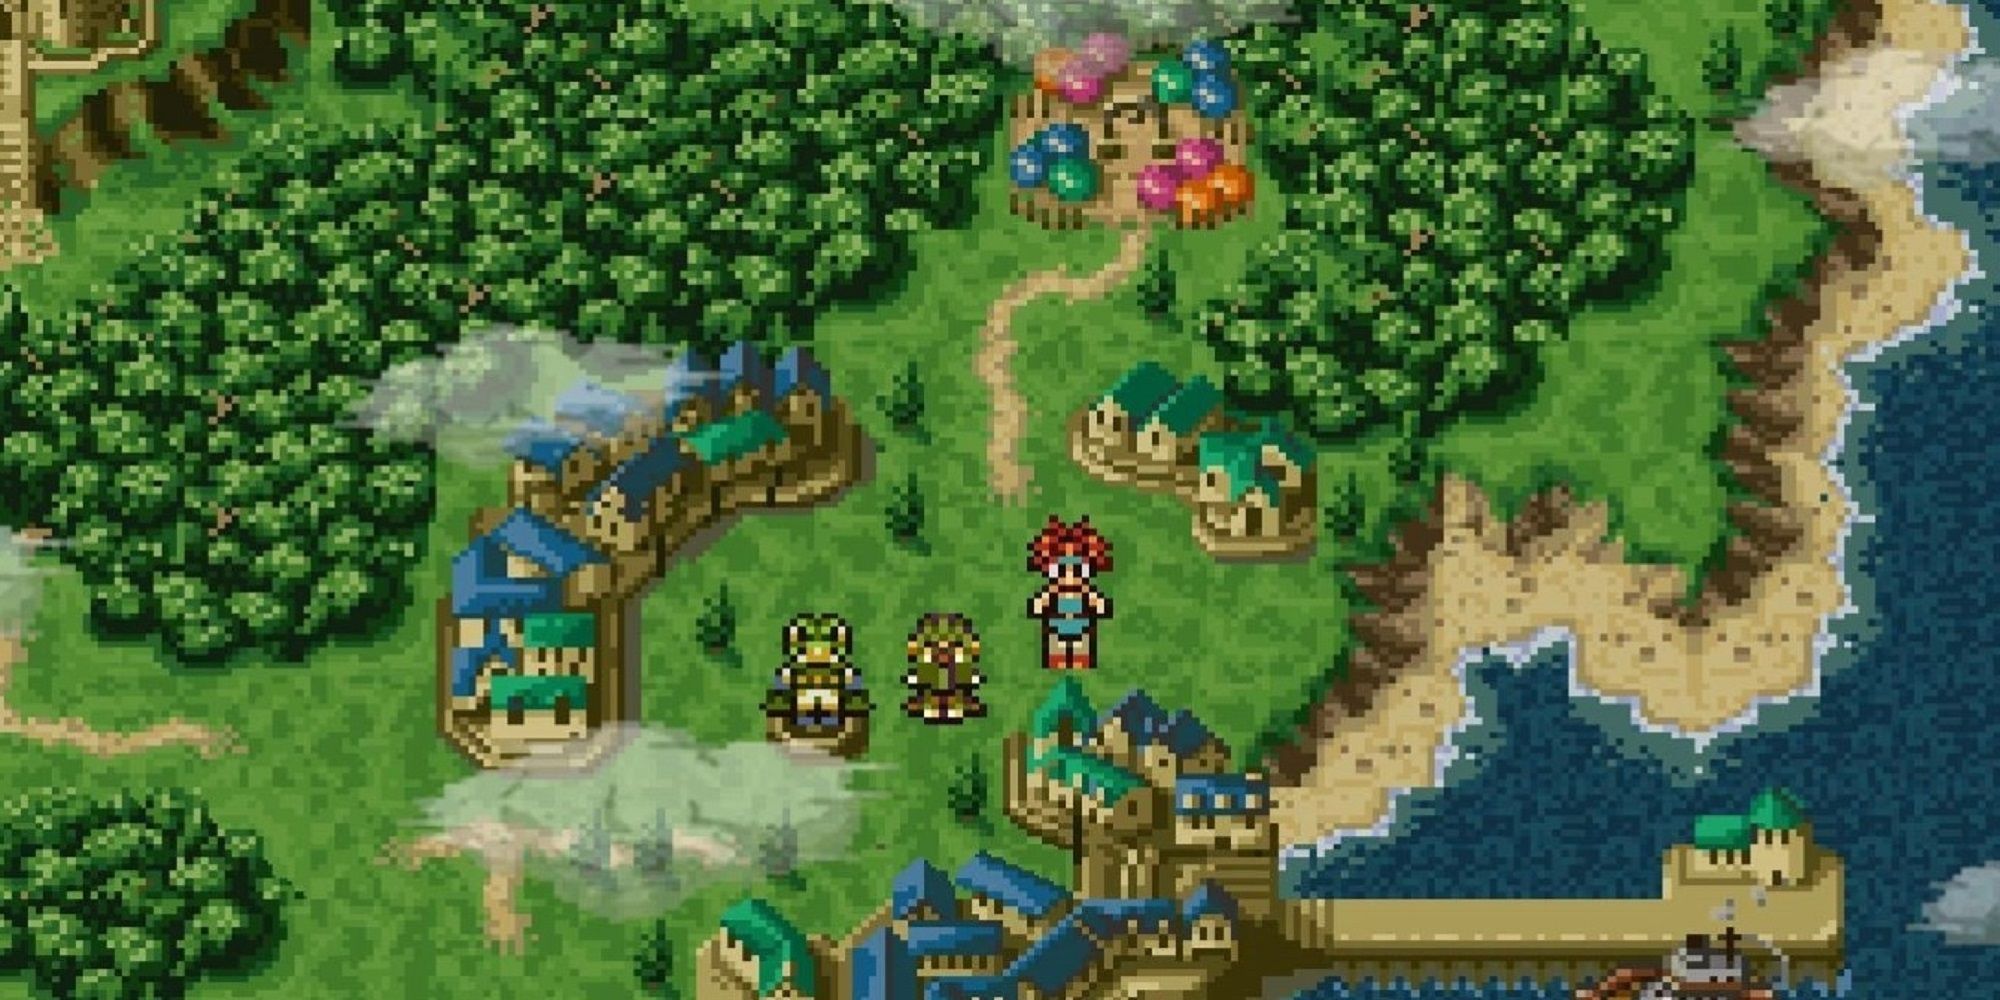 Screencap from Chrono Trigger showing three characters near a beach